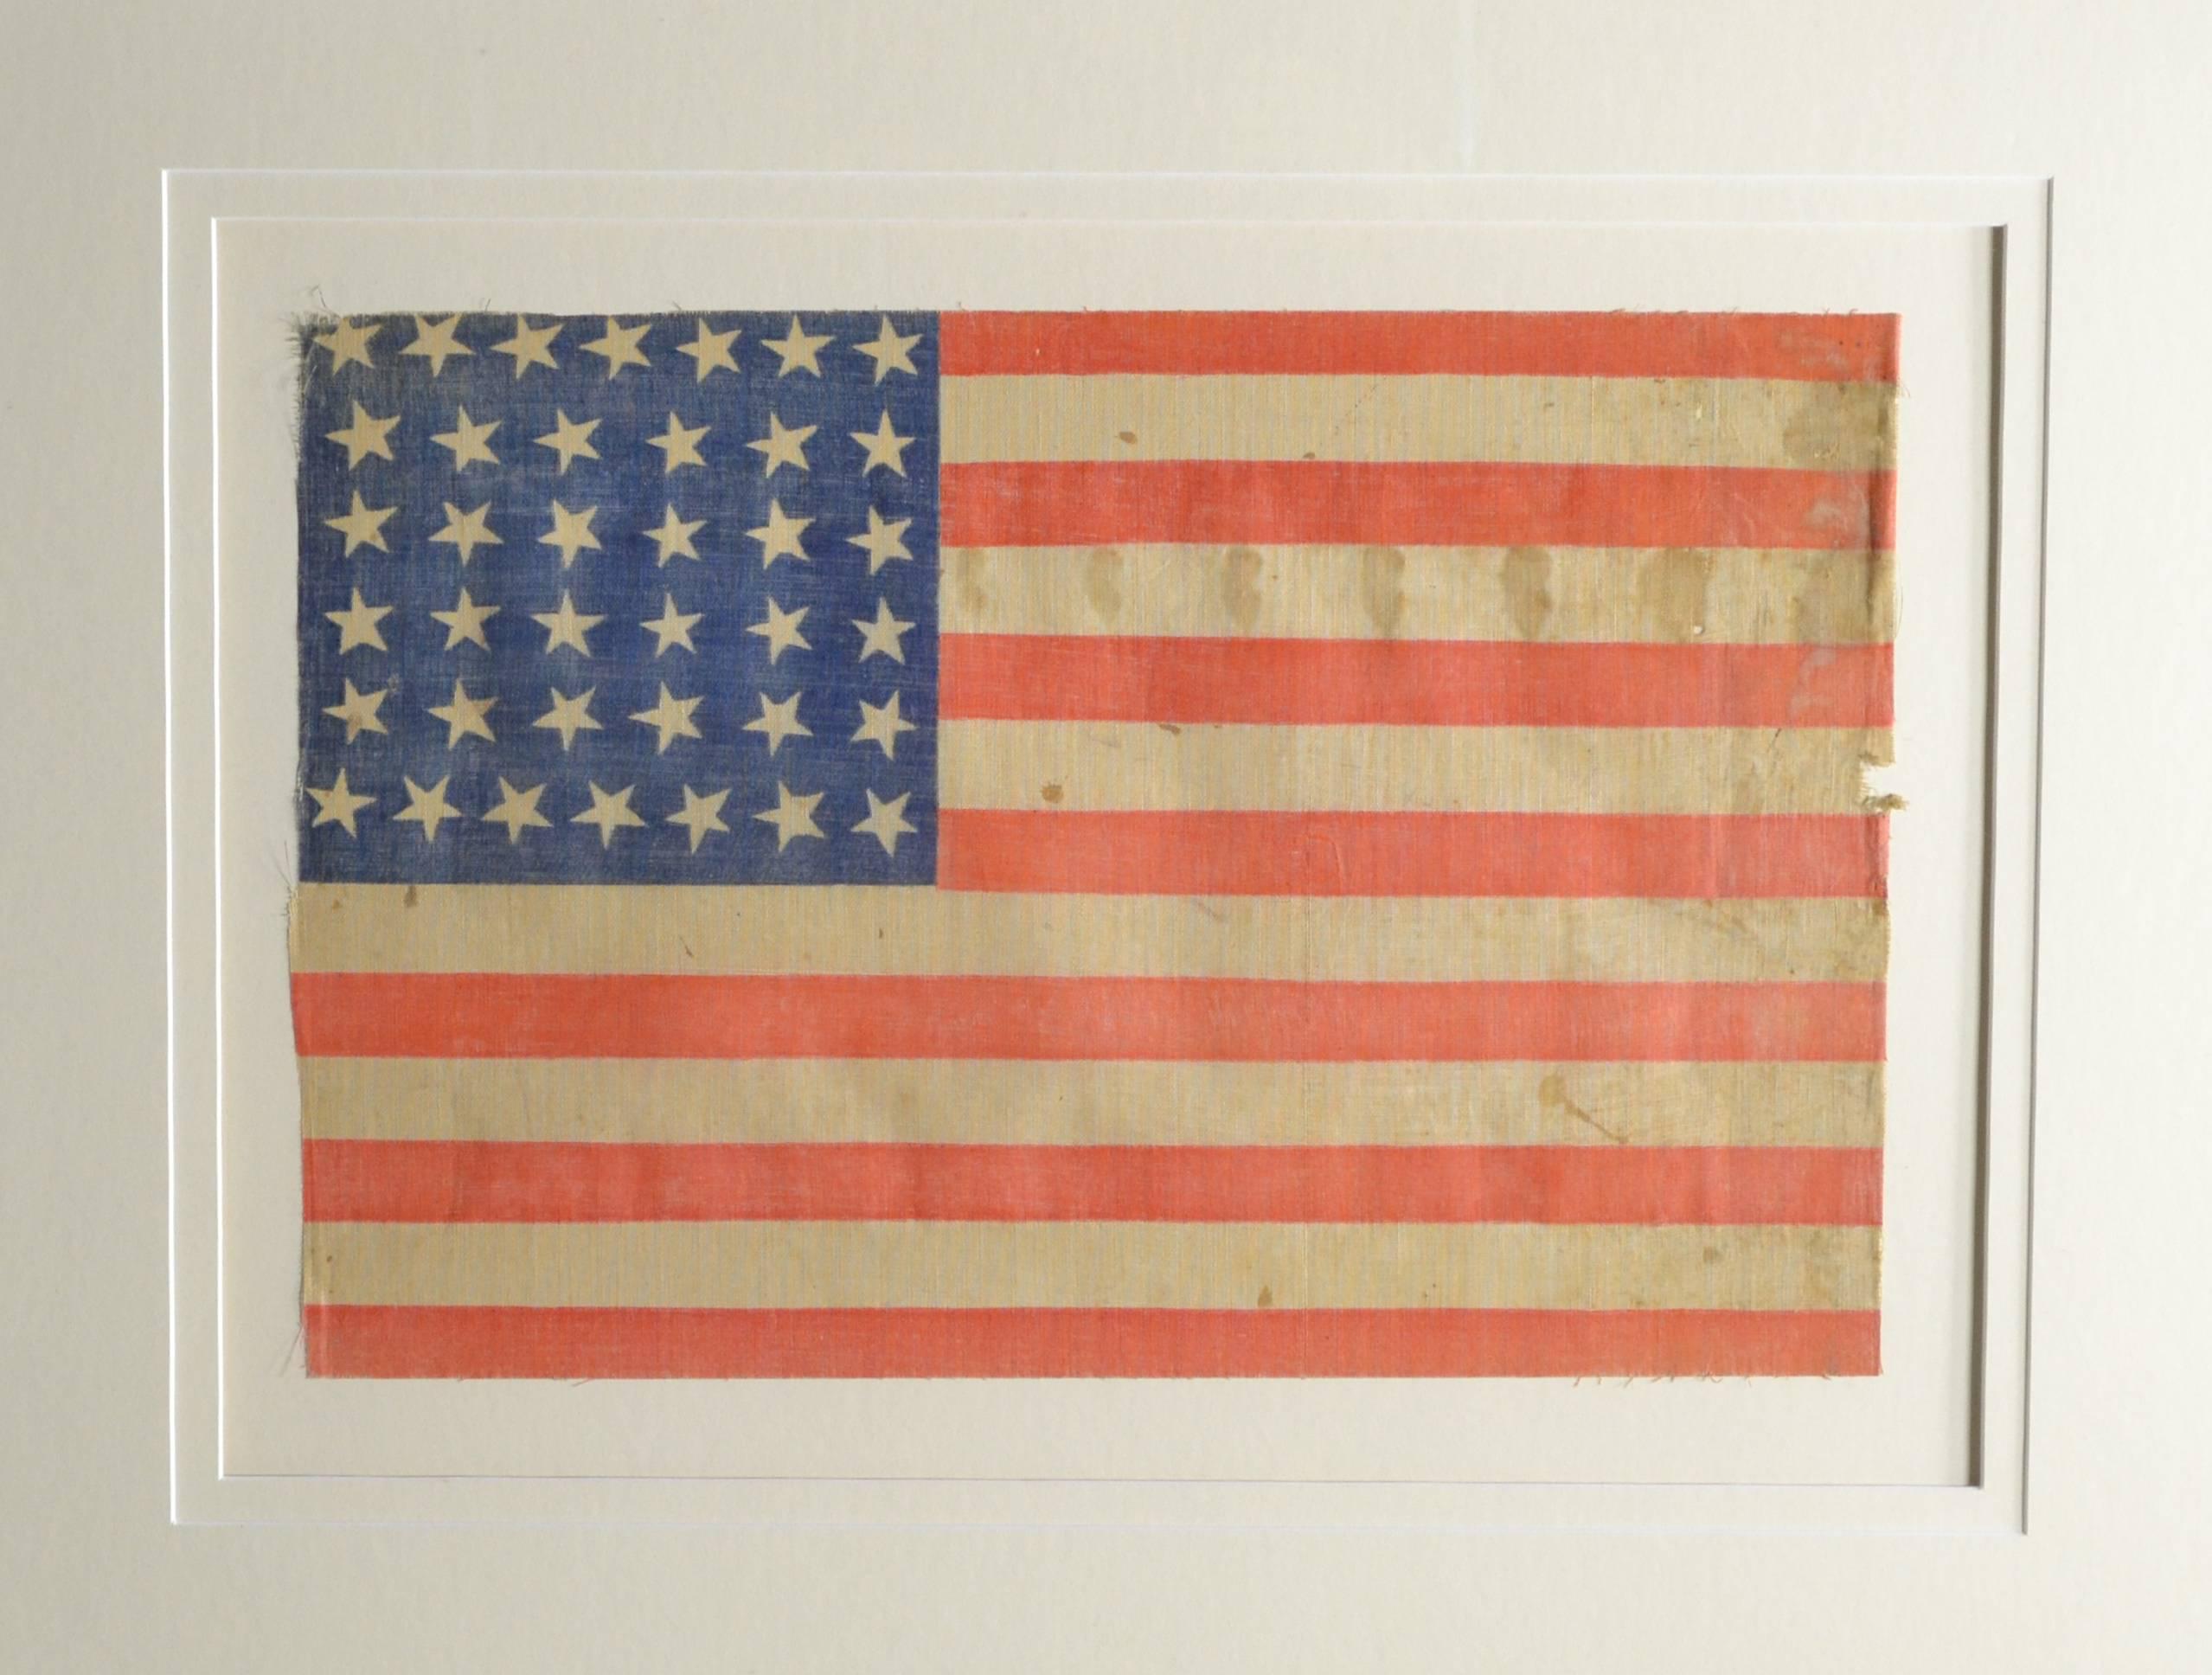 Authentic antique 38 star flag from 1876, America's birthday. Flag has a very rare star arrangement as it is arranged in a square pattern. Some call this a bee hive pattern. Nevertheless it’s a rare star pattern. The stars are tilted and look like